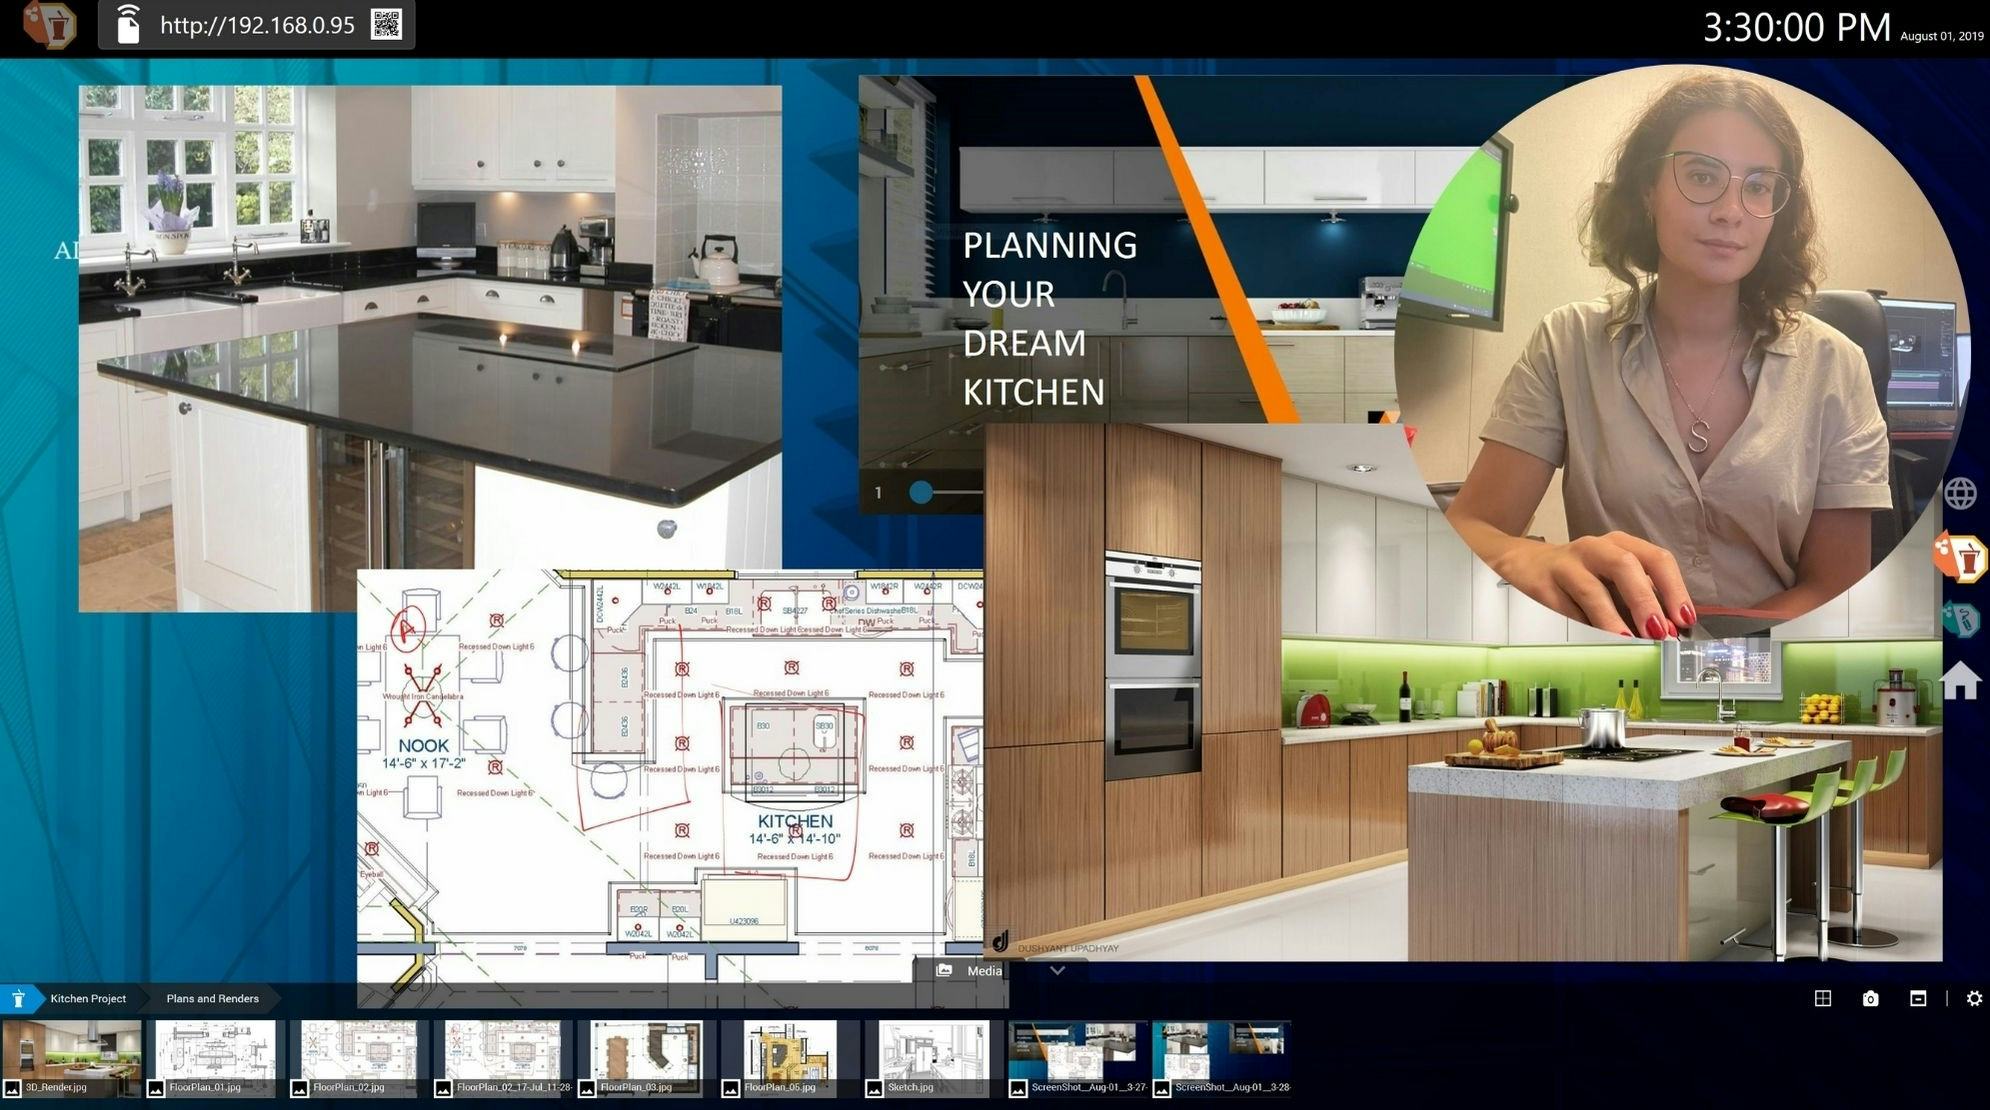 Reactiv SUITE Software - Technical Sales Presentation - visually layer data to present a concept or show a proposal